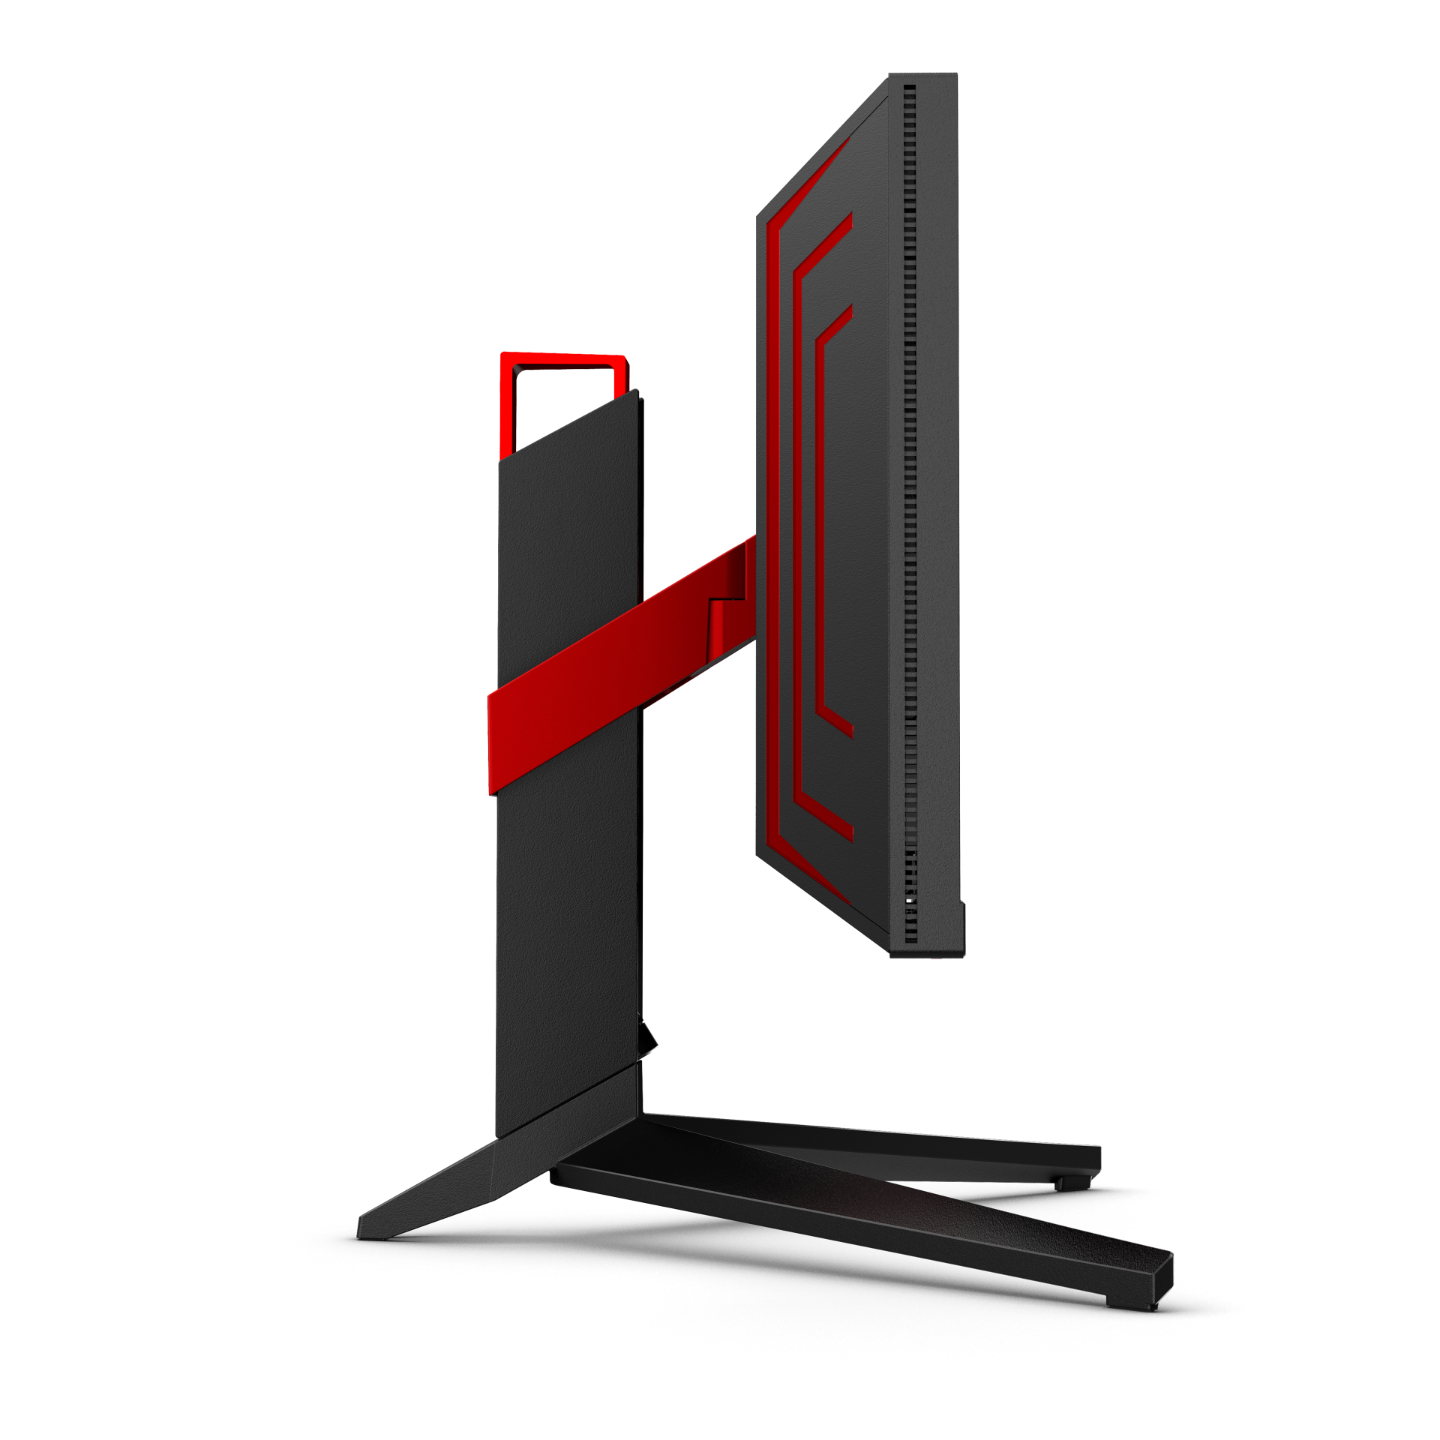 AOC Gaming U28G2XU2: 28-inch gaming monitor revealed with 4K, 144 Hz and  VESA DisplayHDR 400 support -  News